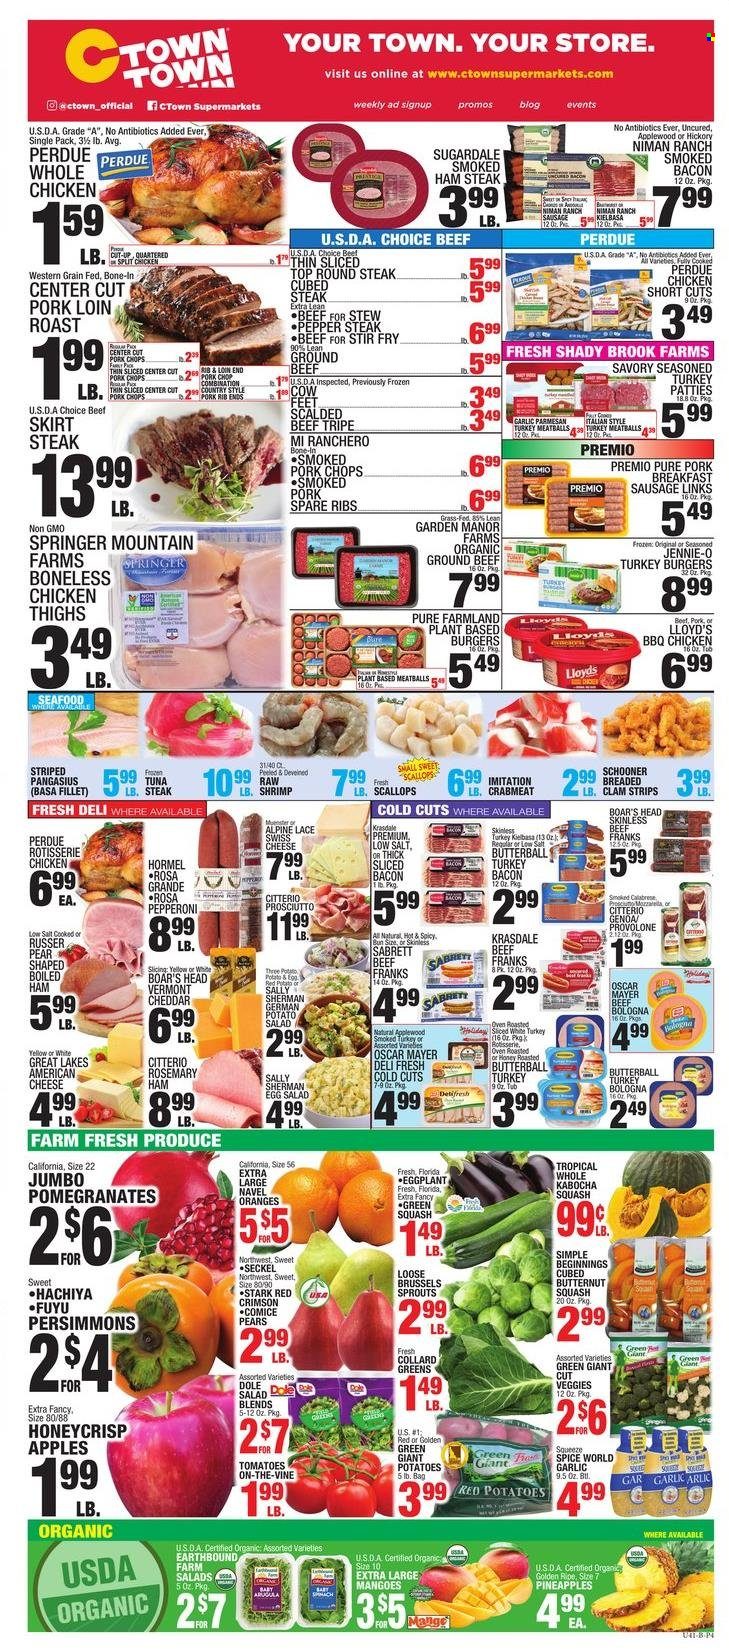 thumbnail - C-Town Flyer - 12/03/2021 - 12/09/2021 - Sales products - persimmons, collard greens, garlic, tomatoes, zucchini, potatoes, pumpkin, salad, Dole, eggplant, brussel sprouts, apples, pineapple, oranges, clams, crab meat, scallops, tuna, pangasius, seafood, shrimps, chicken roast, meatballs, hamburger, Perdue®, Hormel, Sugardale, bacon, Butterball, turkey bacon, ham, prosciutto, smoked ham, bologna sausage, Oscar Mayer, pepperoni, potato salad, ham steaks, american cheese, cheddar, cheese, Provolone, eggs, strips, rosemary, spice, whole chicken, chicken thighs, beef meat, beef tripe, ground beef, steak, round steak, turkey burger, pork chops, pork loin, pork meat, pork ribs, pork spare ribs, butternut squash, pomegranate, navel oranges. Page 4.